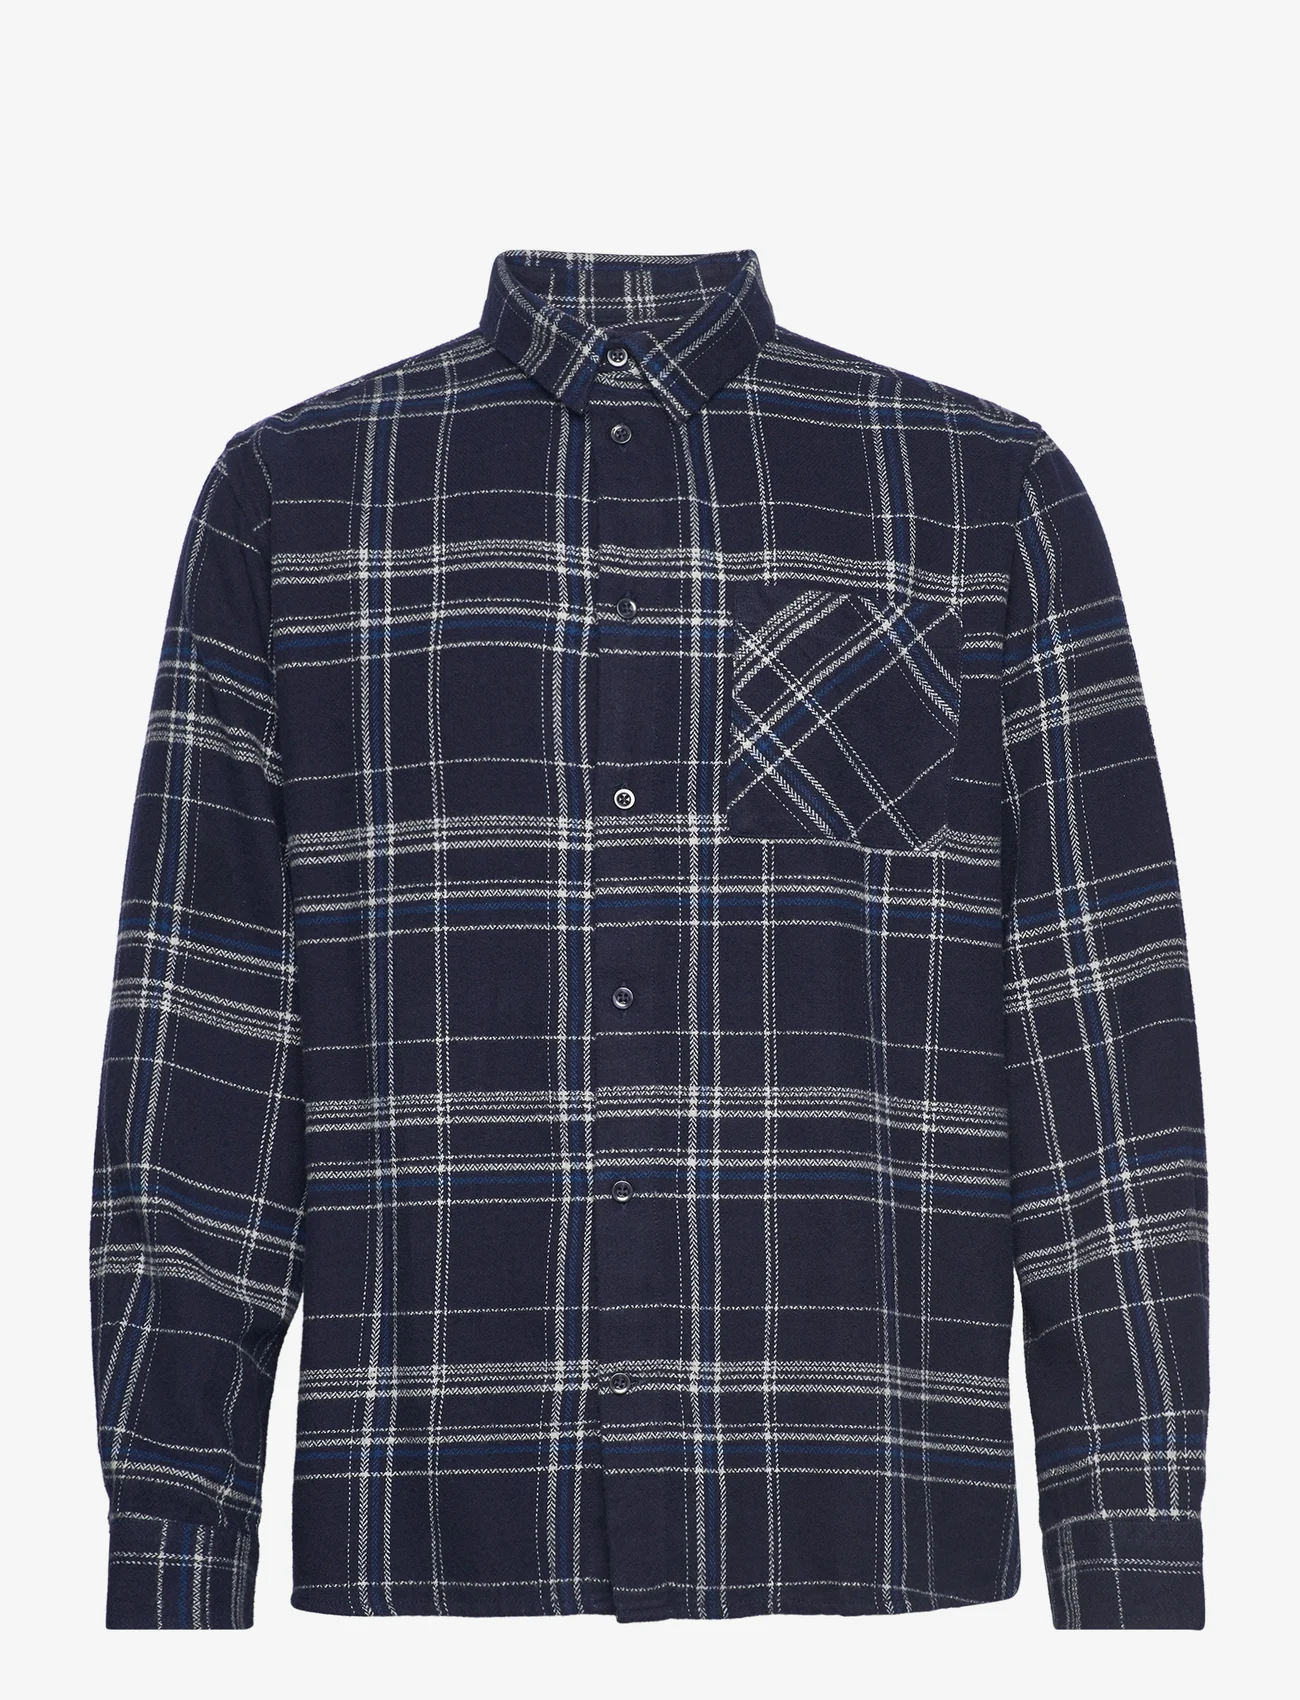 Knowledge Cotton Apparel - Light flannel checkered relaxed fit - karierte hemden - navy check - 0